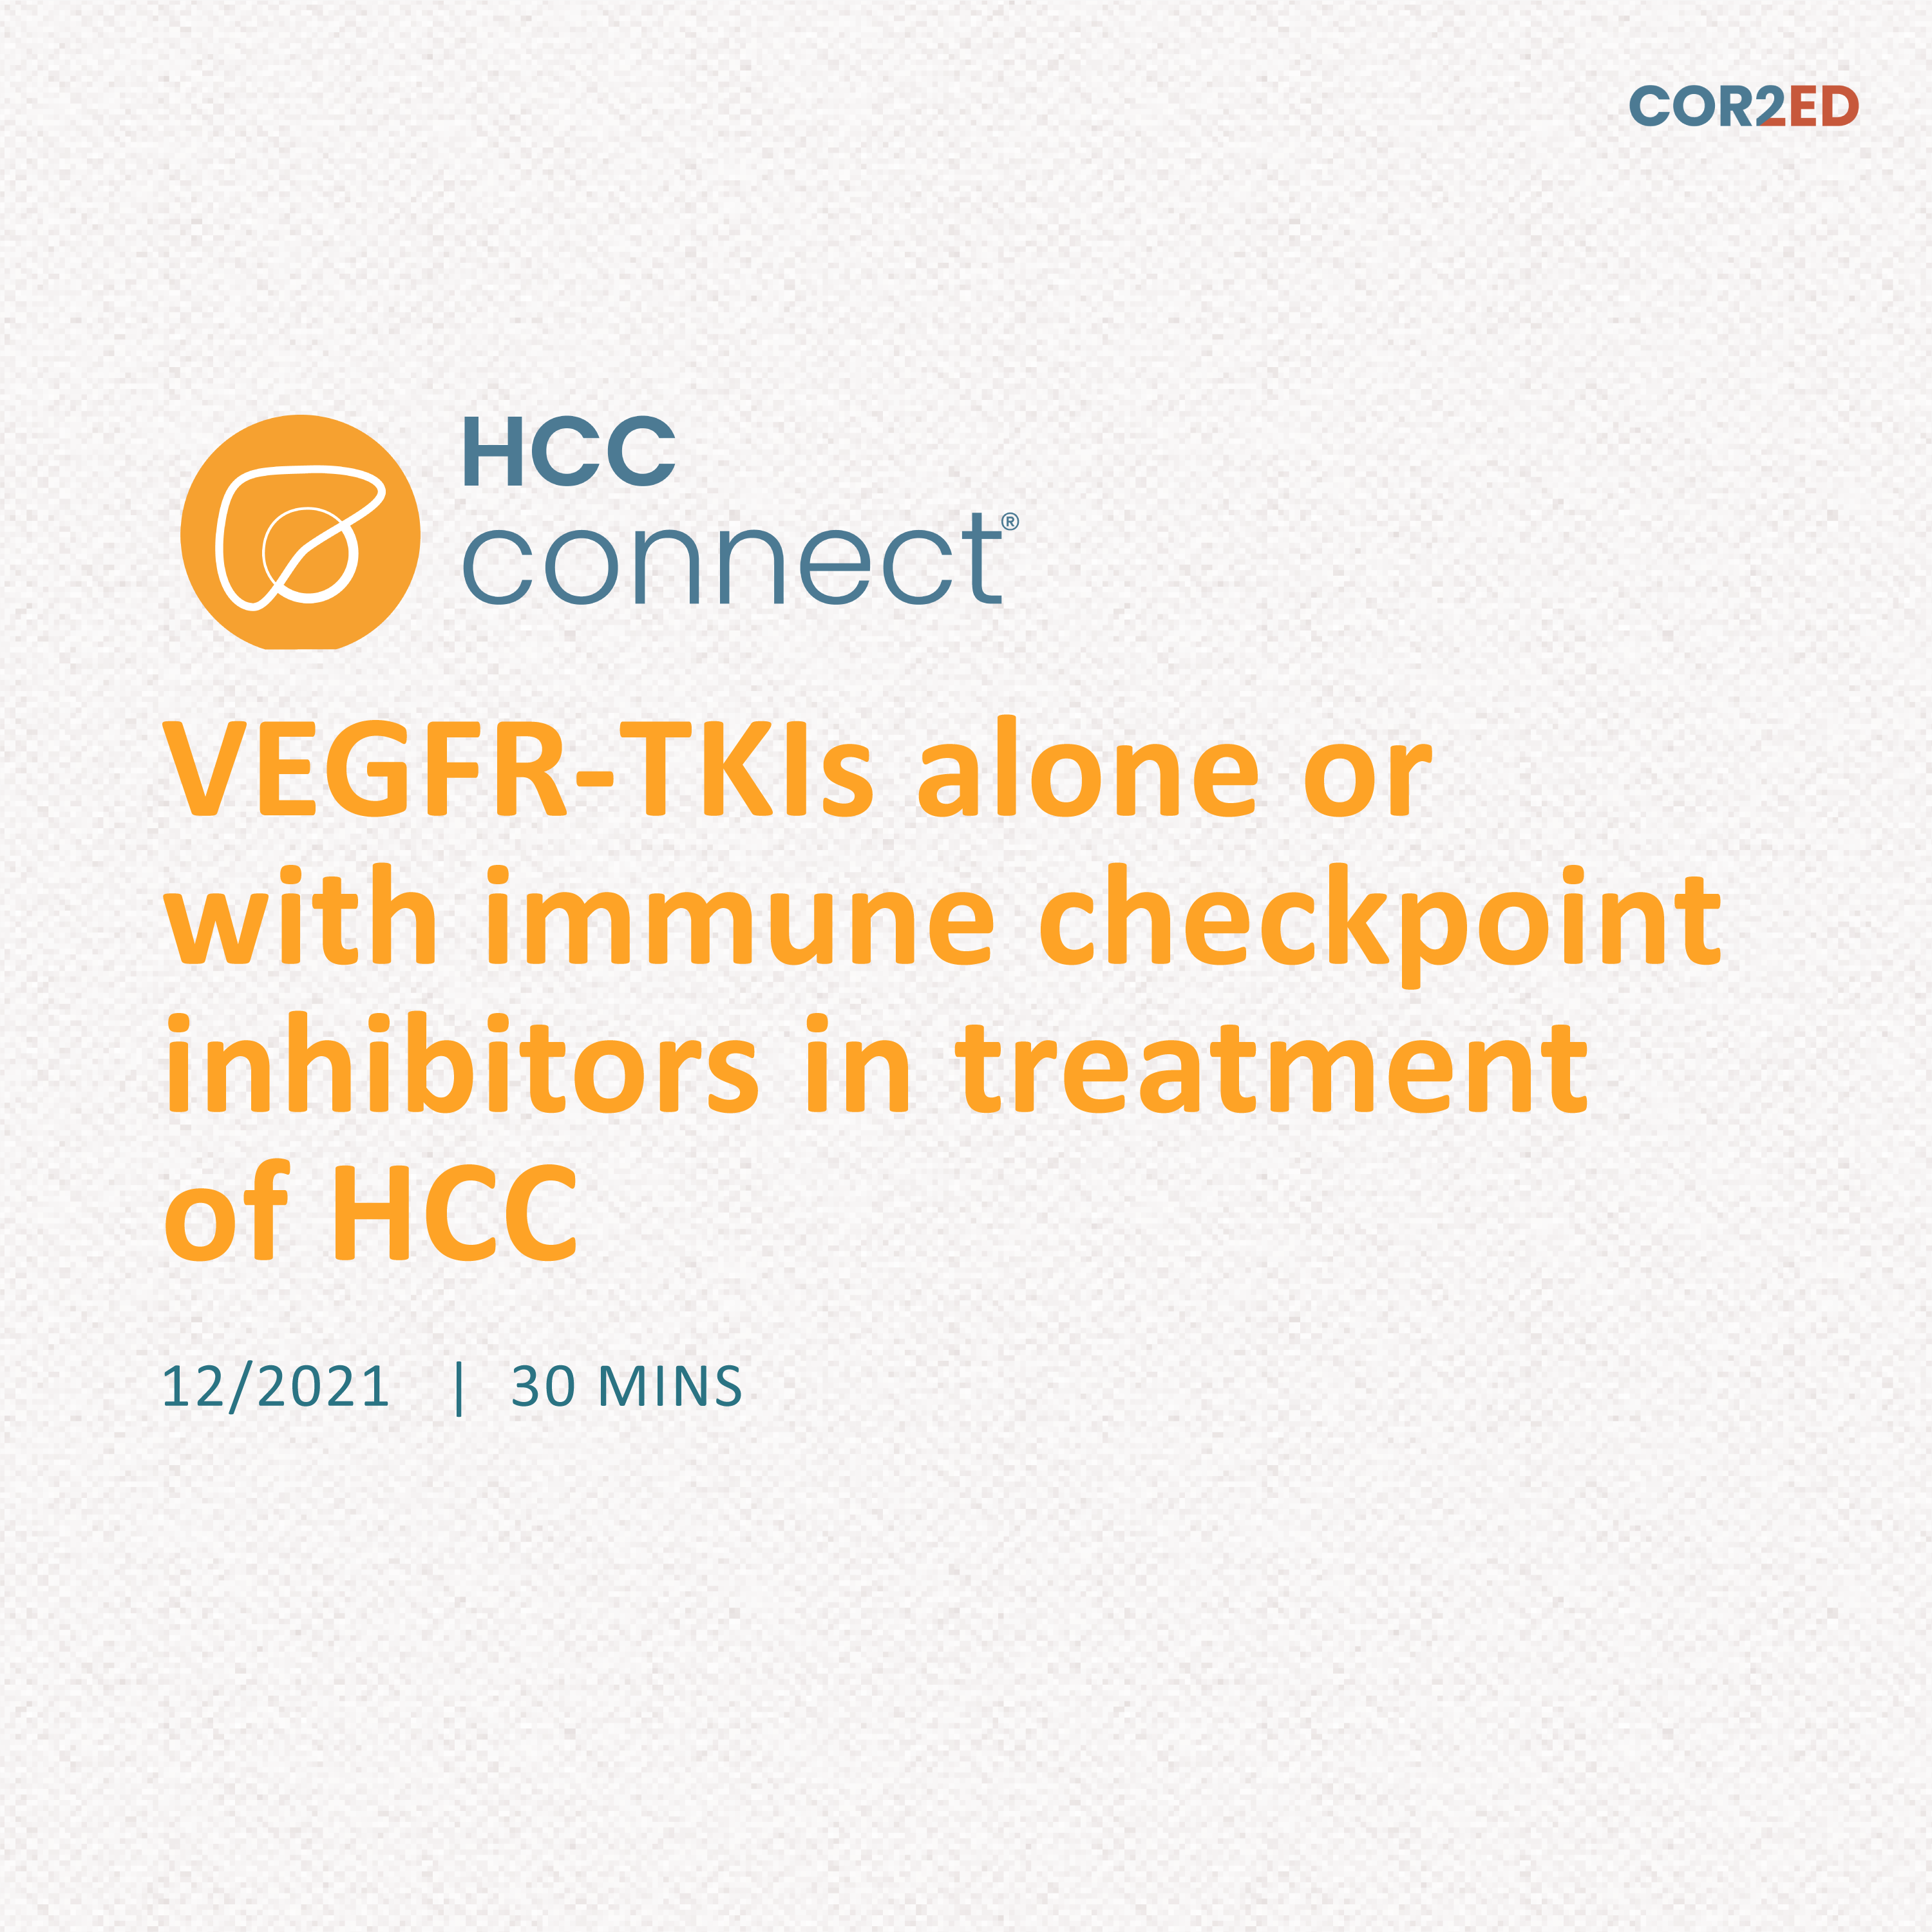 VEGFR-TKIs alone or in combination with immune checkpoint inhibitors in clinical practice for the treatment of HCC